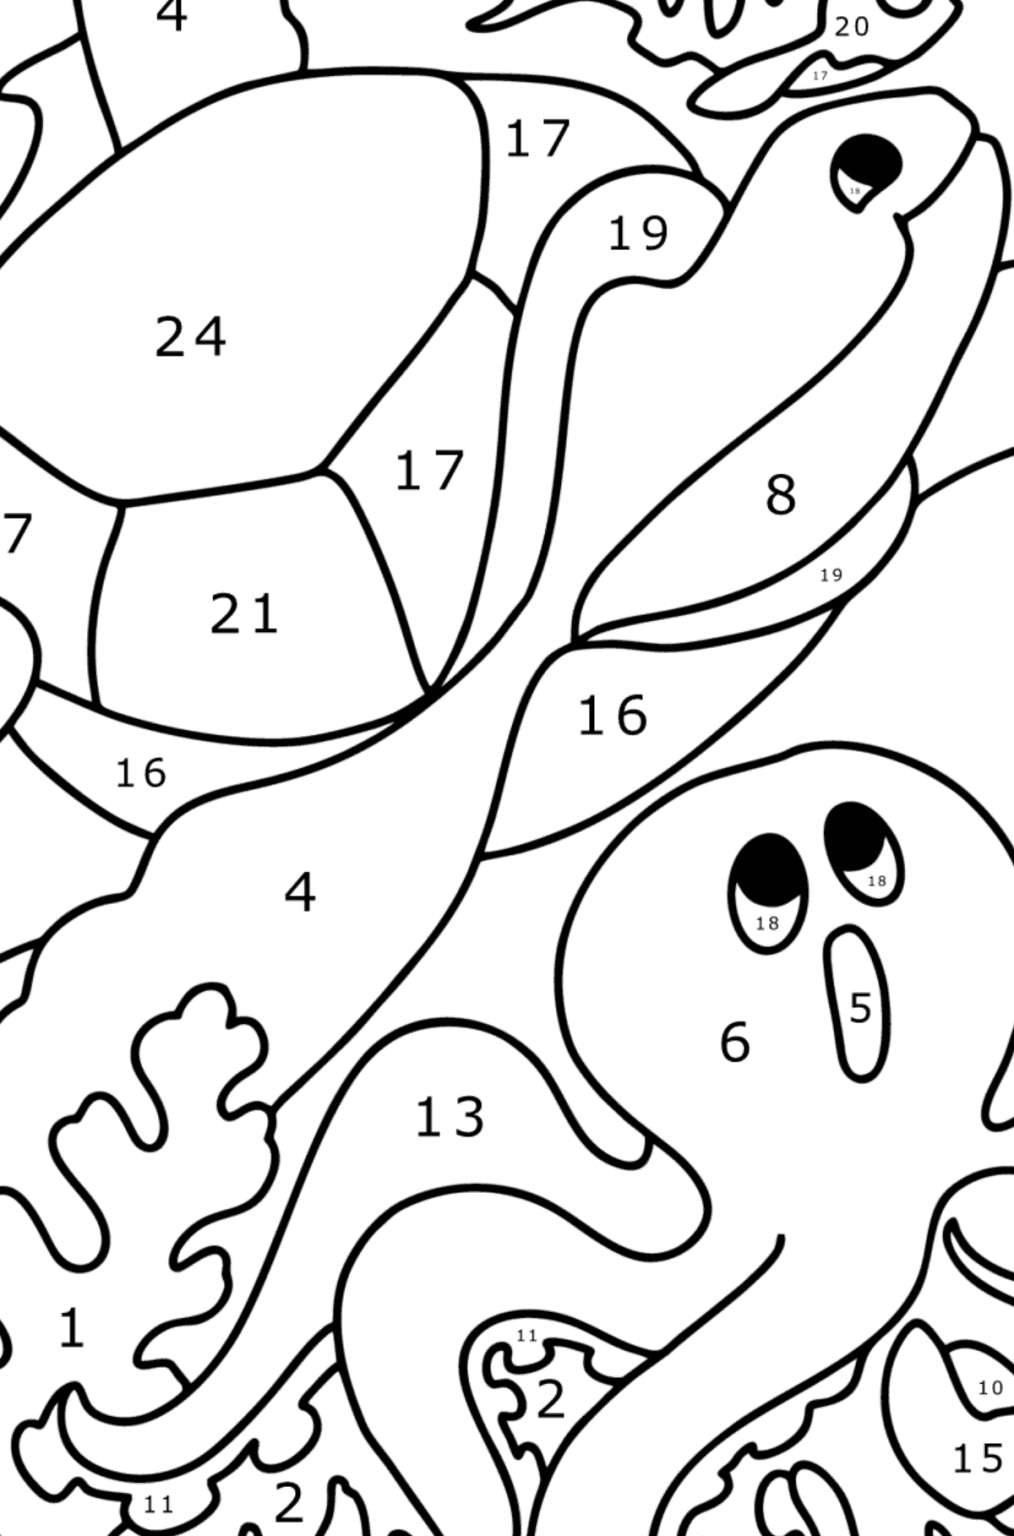 fish-turtle-crab-and-octopus-coloring-page-online-and-print